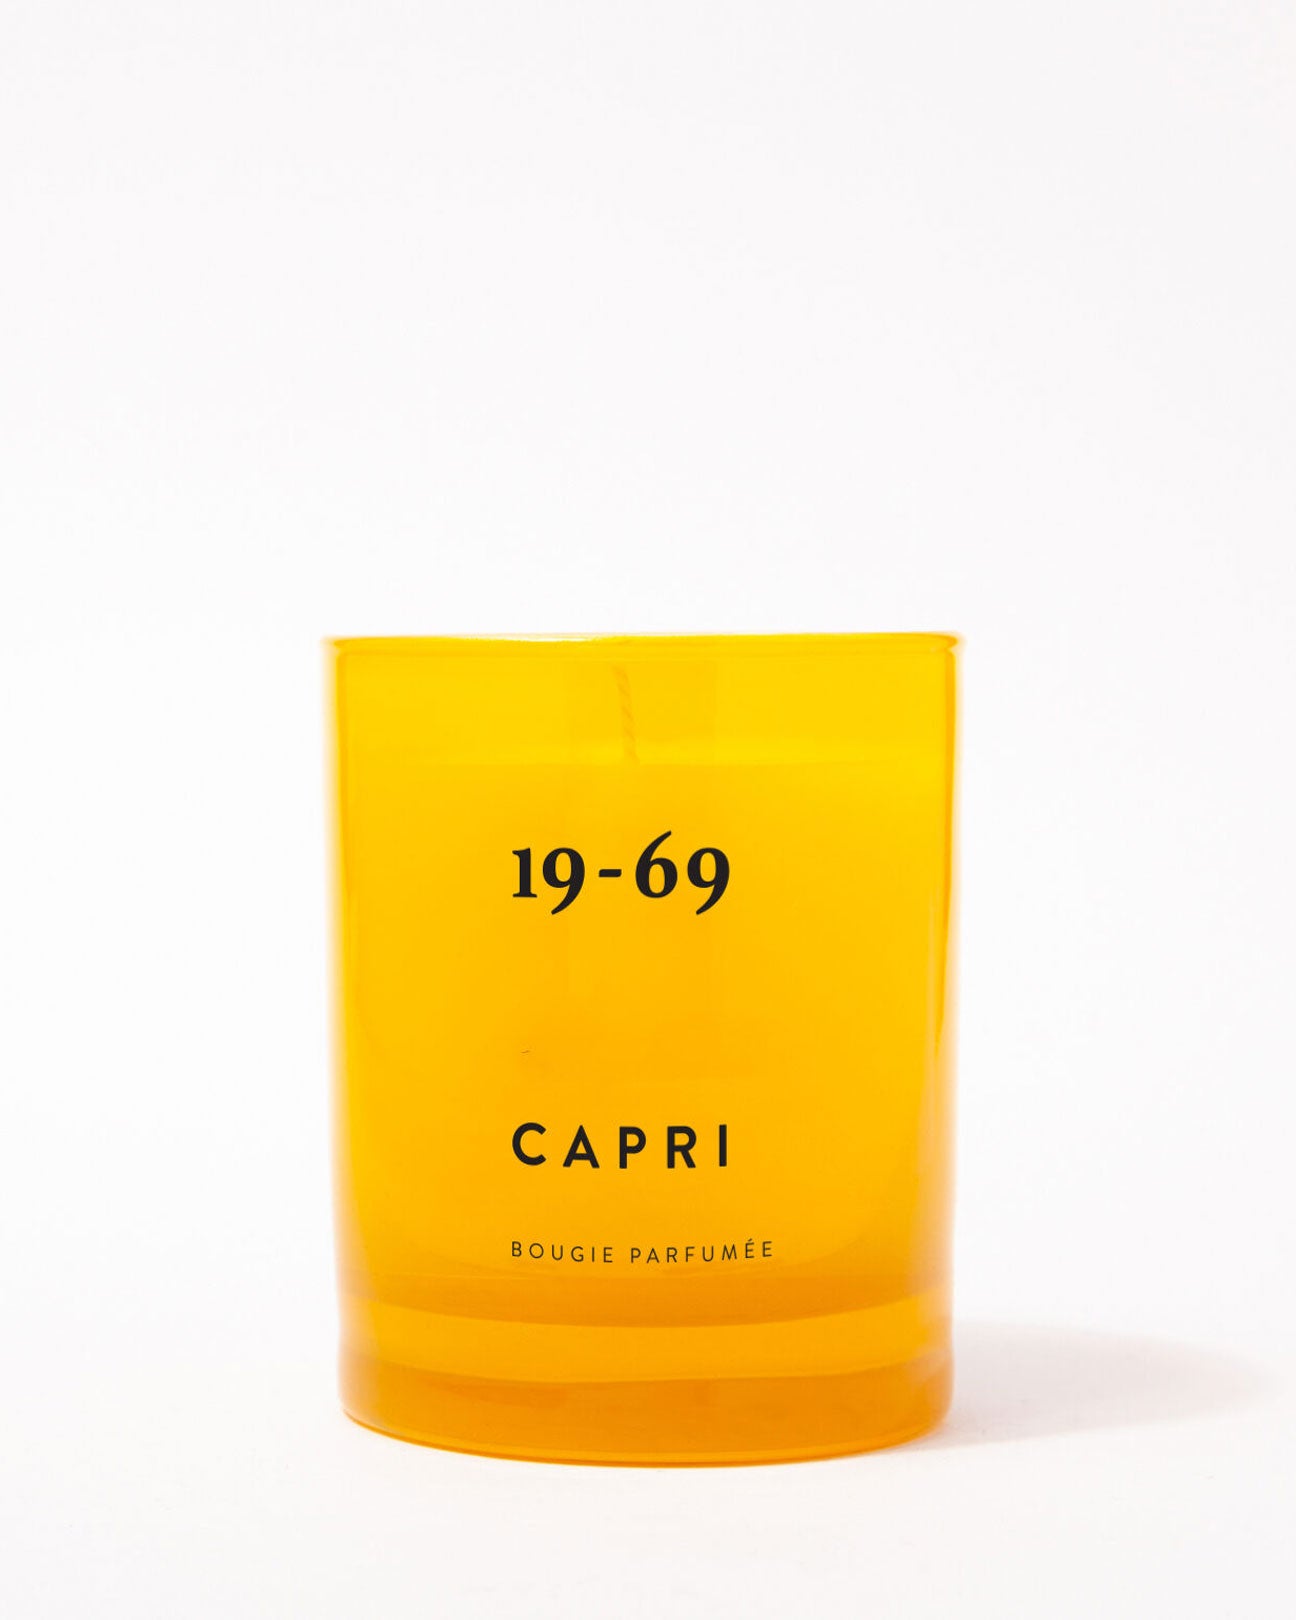 19-69 Candle in Capri available at Lahn.shop